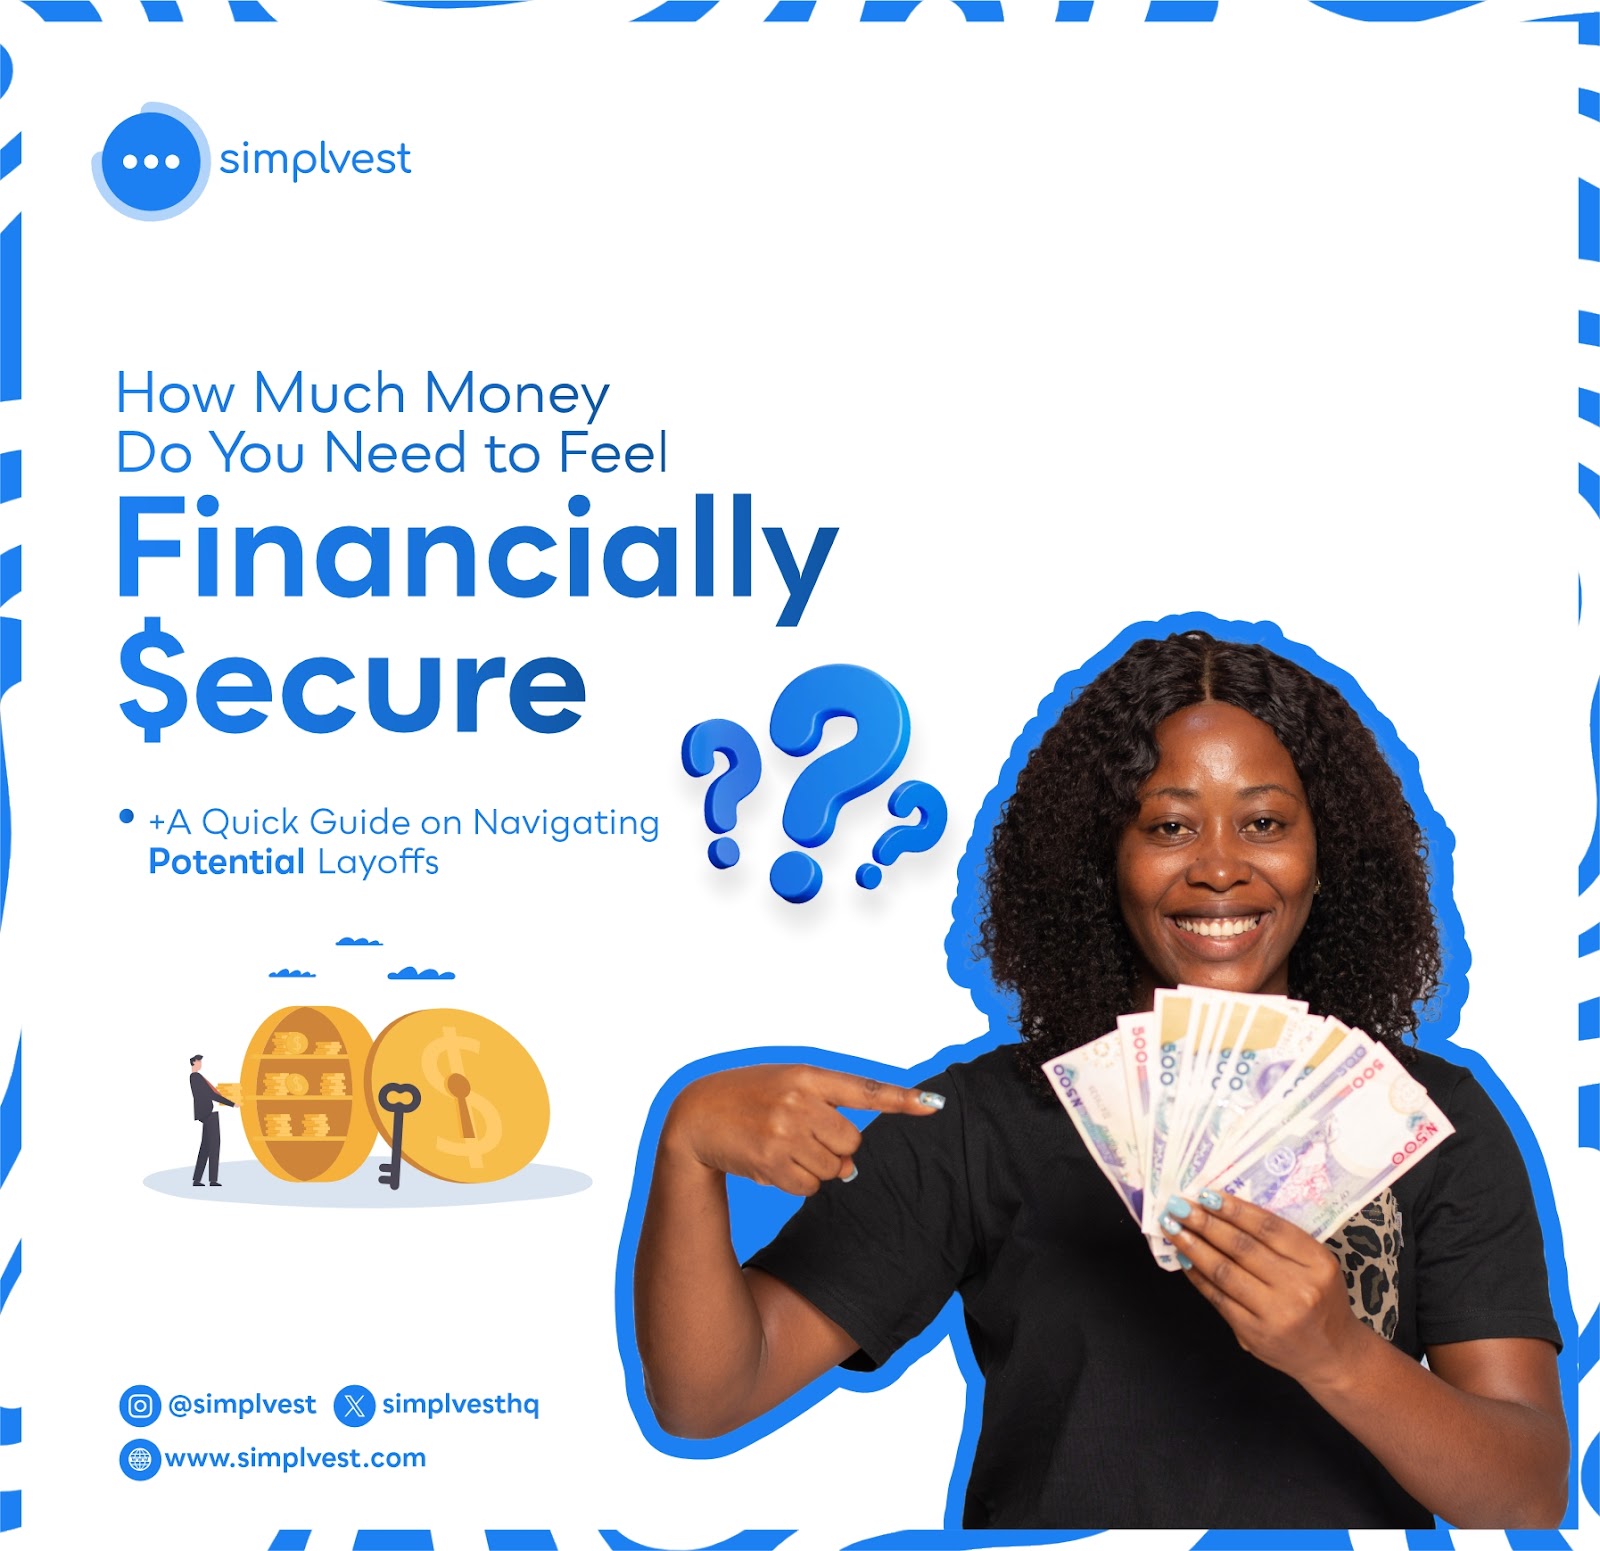 Are you financially secure?